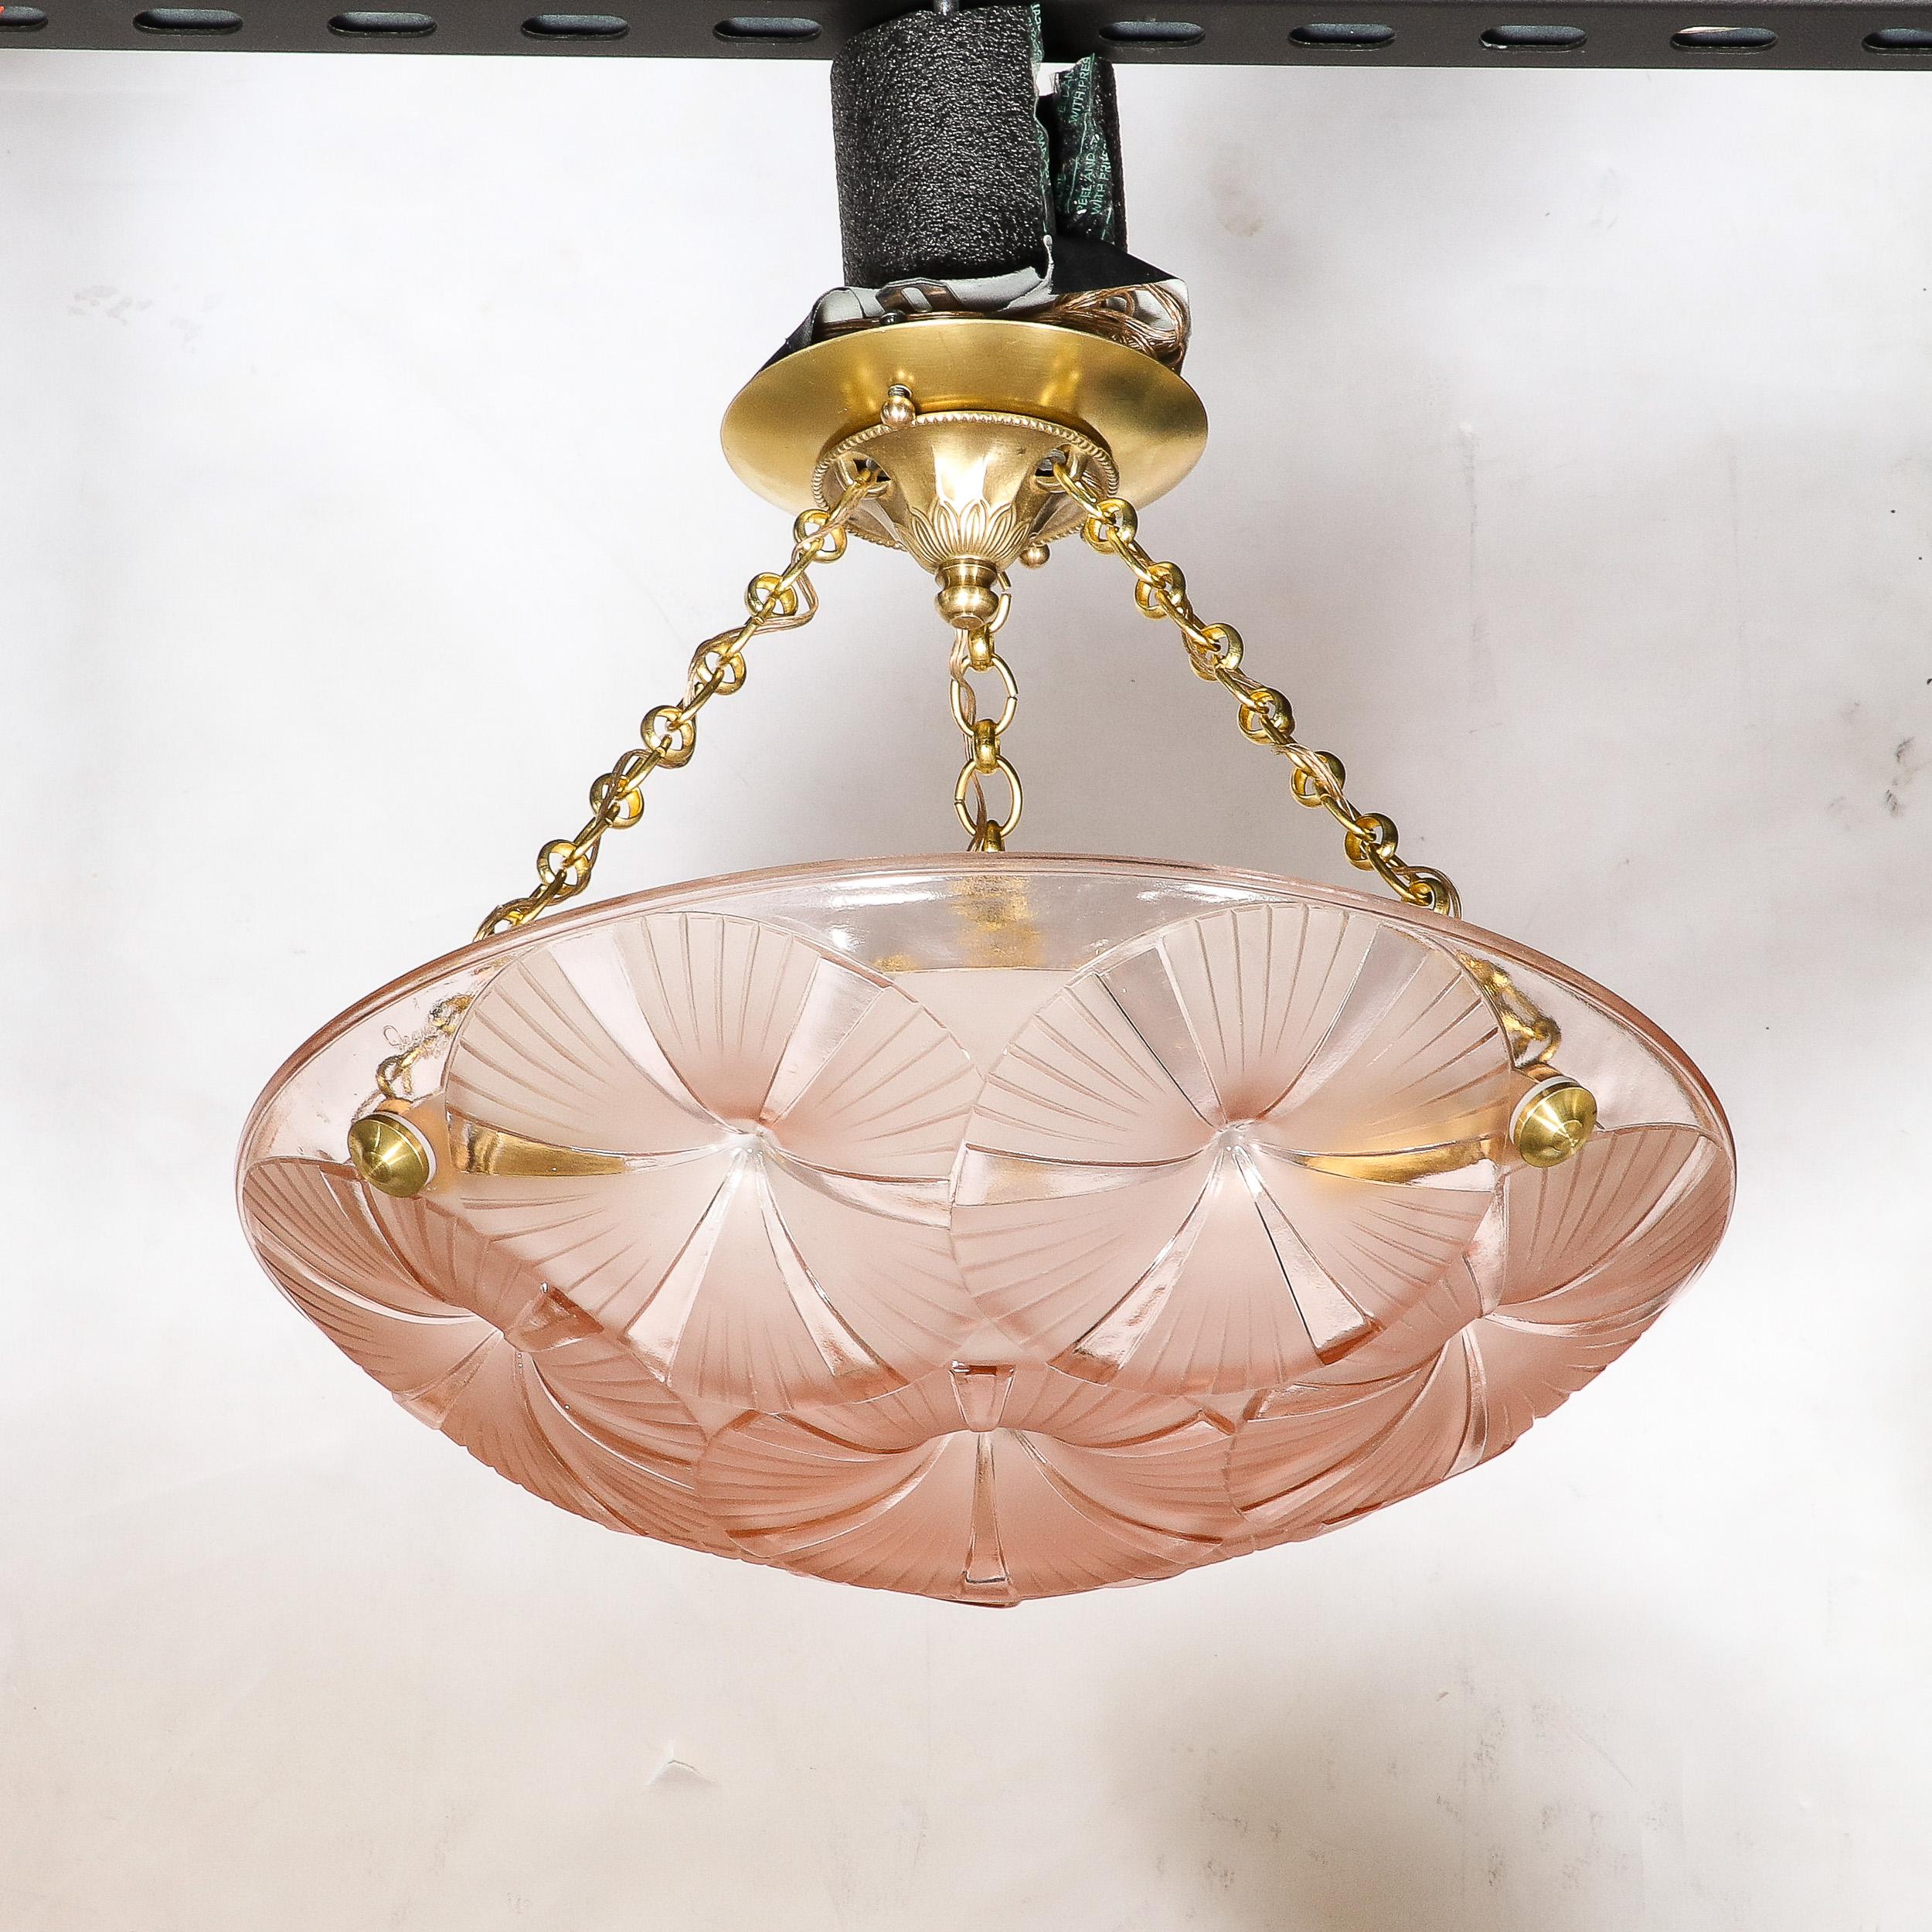 Mid-20th Century Pair of Art Deco Pendant Chandeliers in Molded & Frosted Rose Glass signed Degue